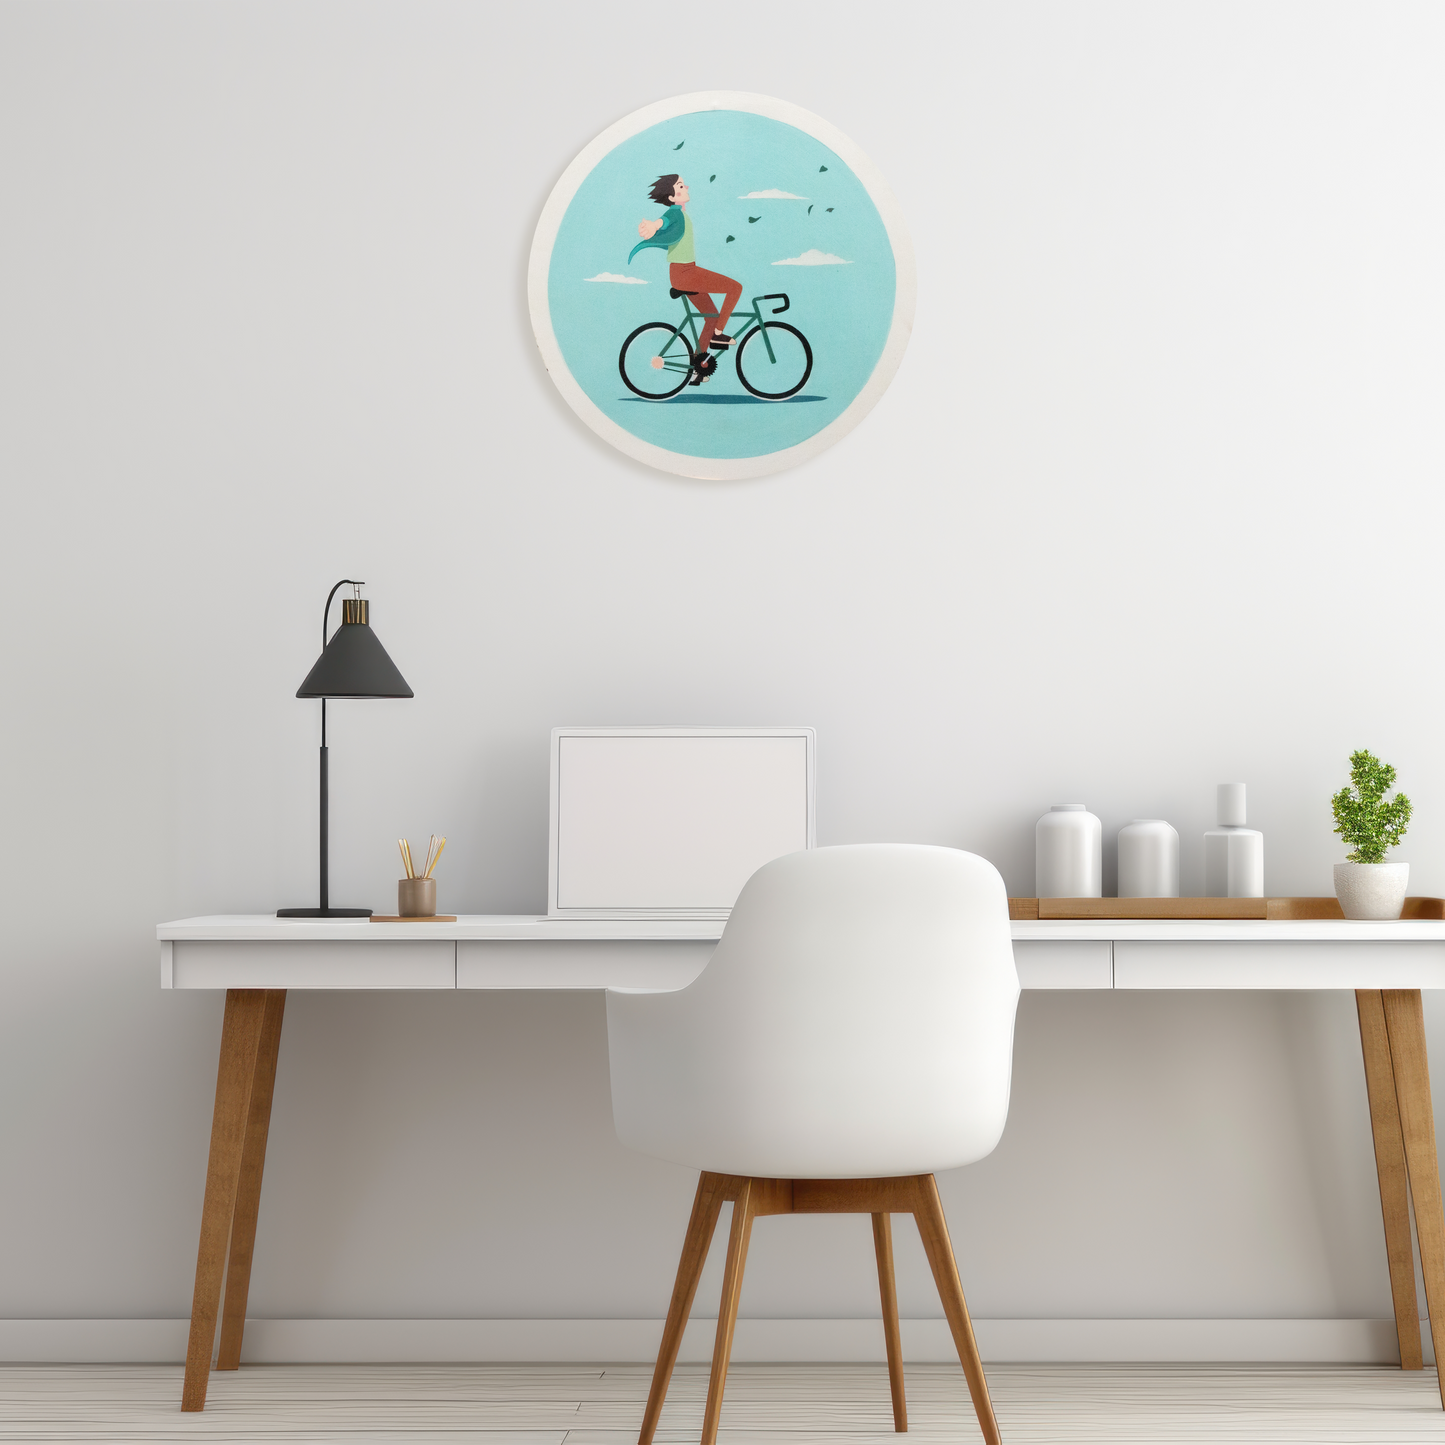 Hand Painted Wall Art - Wall Painting - Journey - Lifestyle - Be Yourself - Home Decor - Office Decor